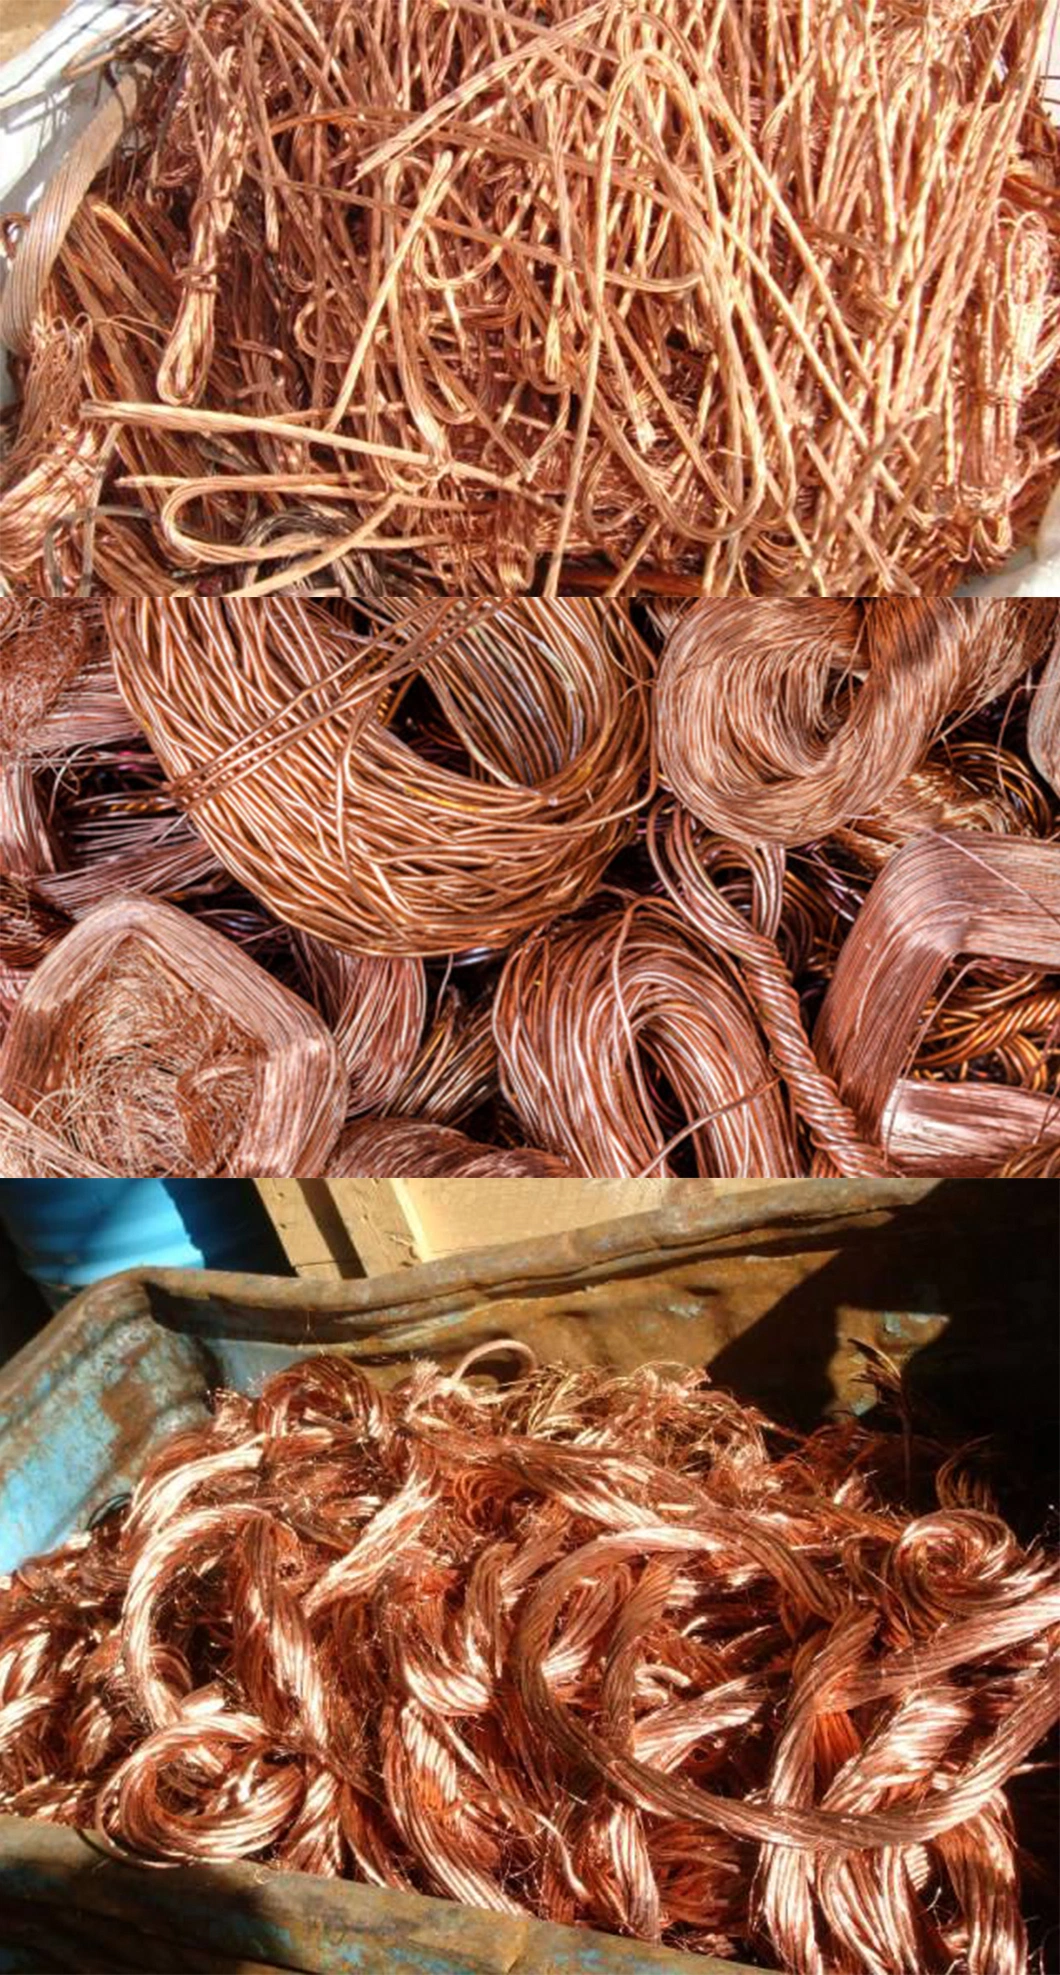 99%Min High Pure High Standard Industrial Red Copper Scrap/Millberry Scrap Copper Wire/Brass Scrap/Electrical Cables with Wholesale Price Hot Selling